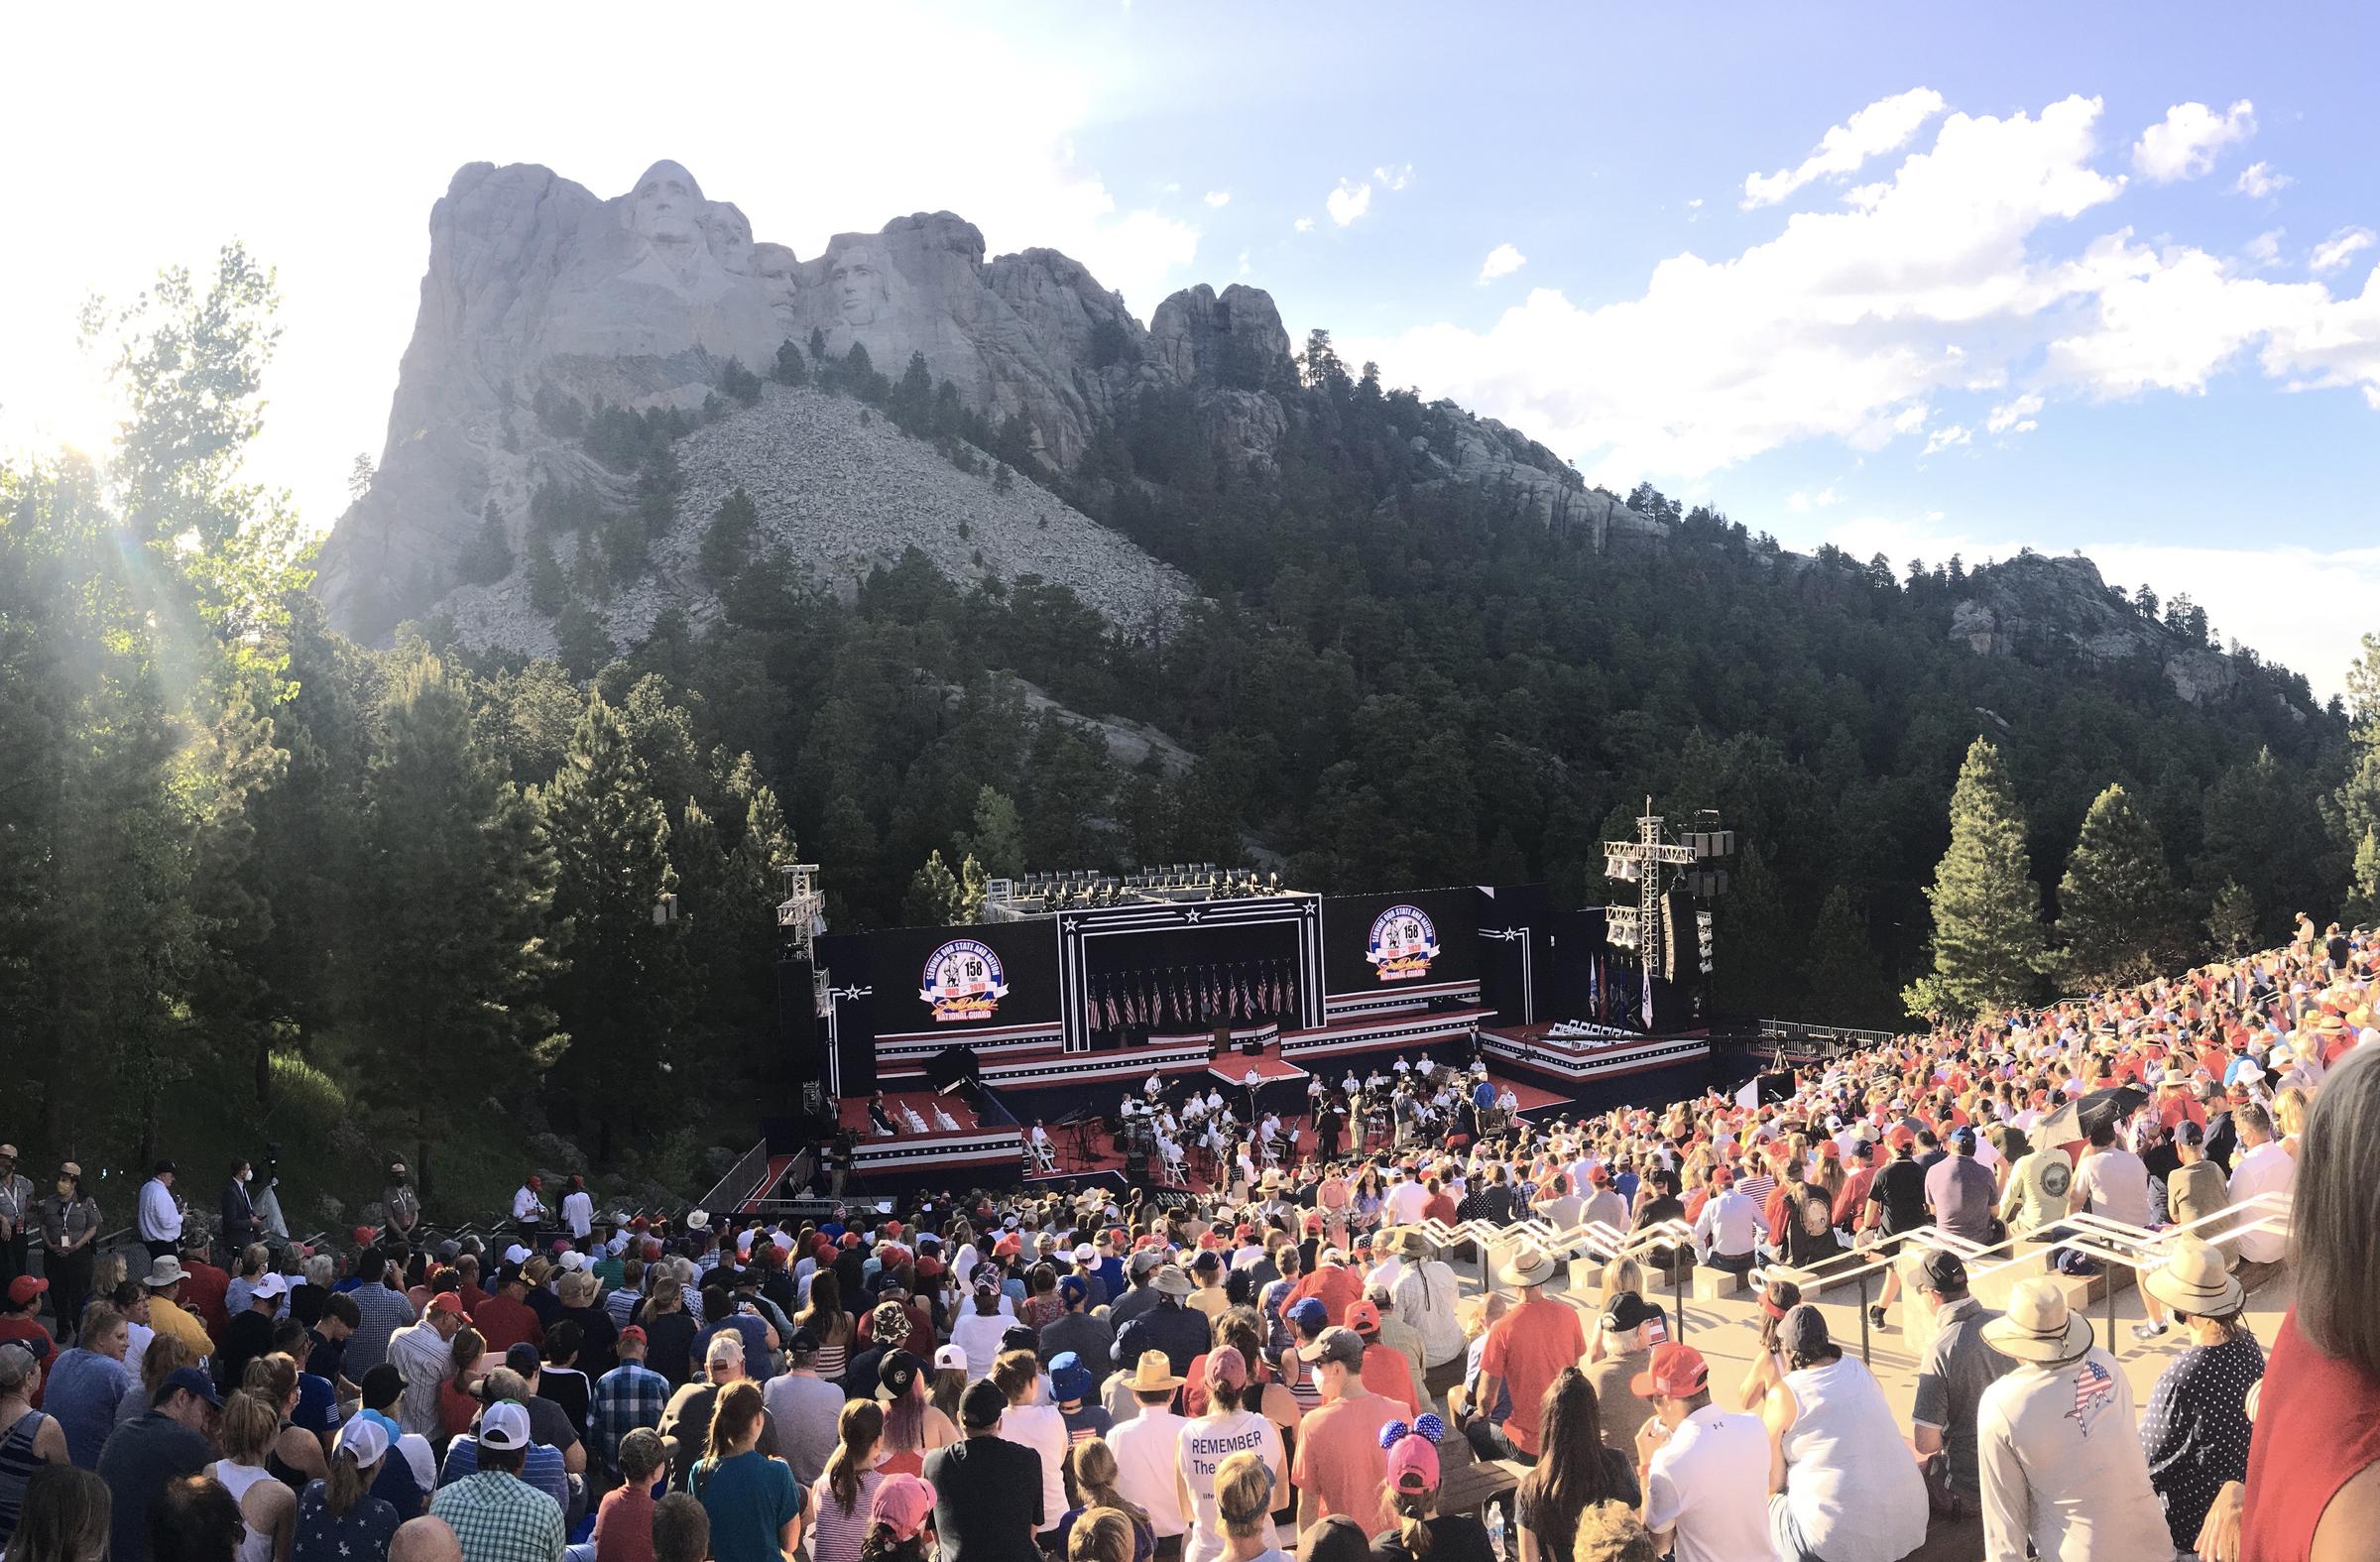 President kicks off Independence celebration with Mount Rushmore fireworks